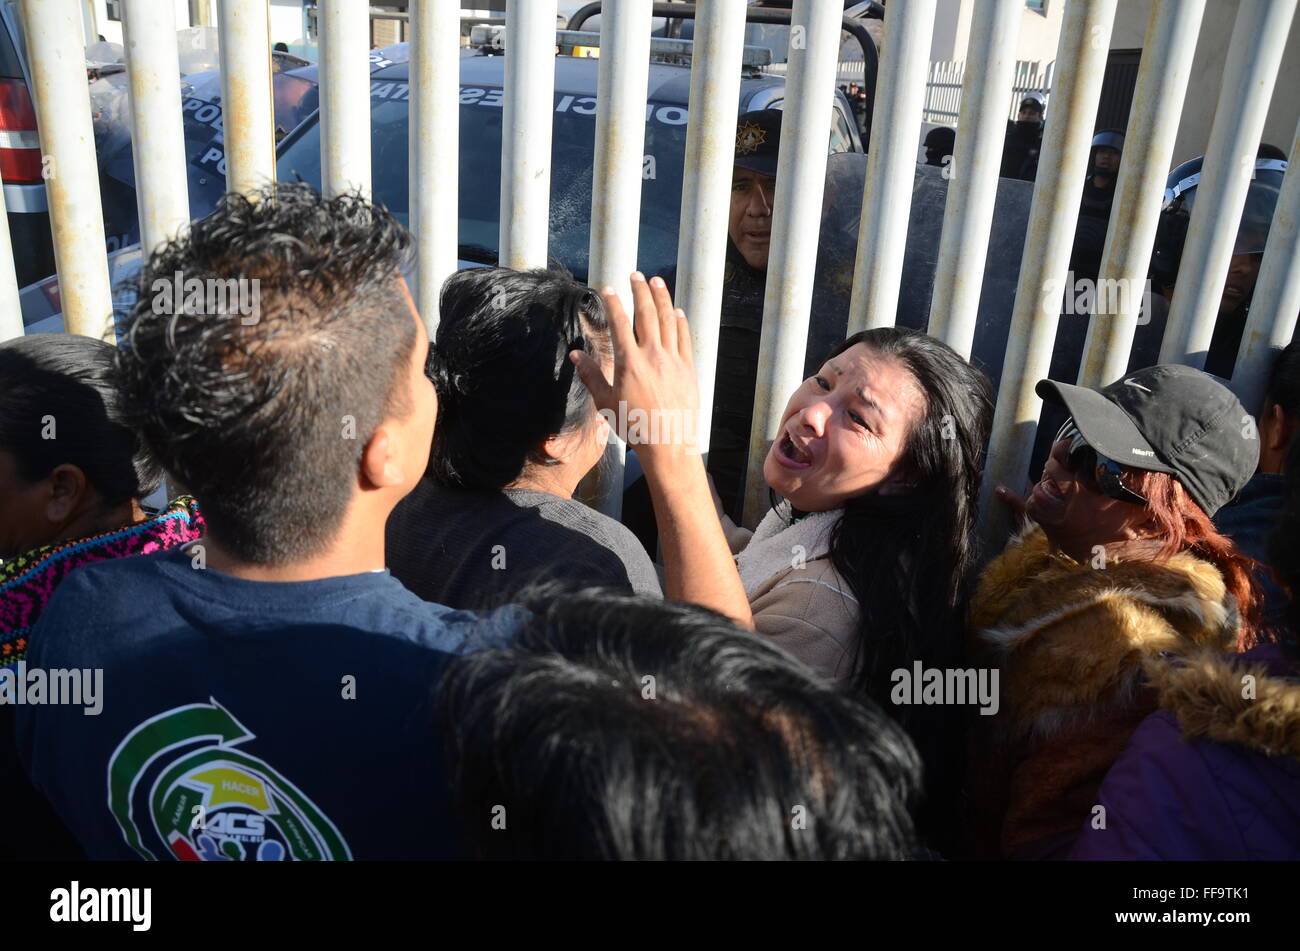 Monterrey, Mexico. 11th Feb, 2016. Family members of inmates wait for information outside the Topo Chico prison, in Monterrey, in the state of Nuevo Leon, Mexico, on Feb. 11, 2016. Jaime Rodriguez Calderon, governor of Nuevo Leon, informed a press conference that 52 people were killed and 12 injured after a fight broke out between two rival fractions of inmates inside the Topo Chico prison. © ABC/Xinhua/Alamy Live News Stock Photo